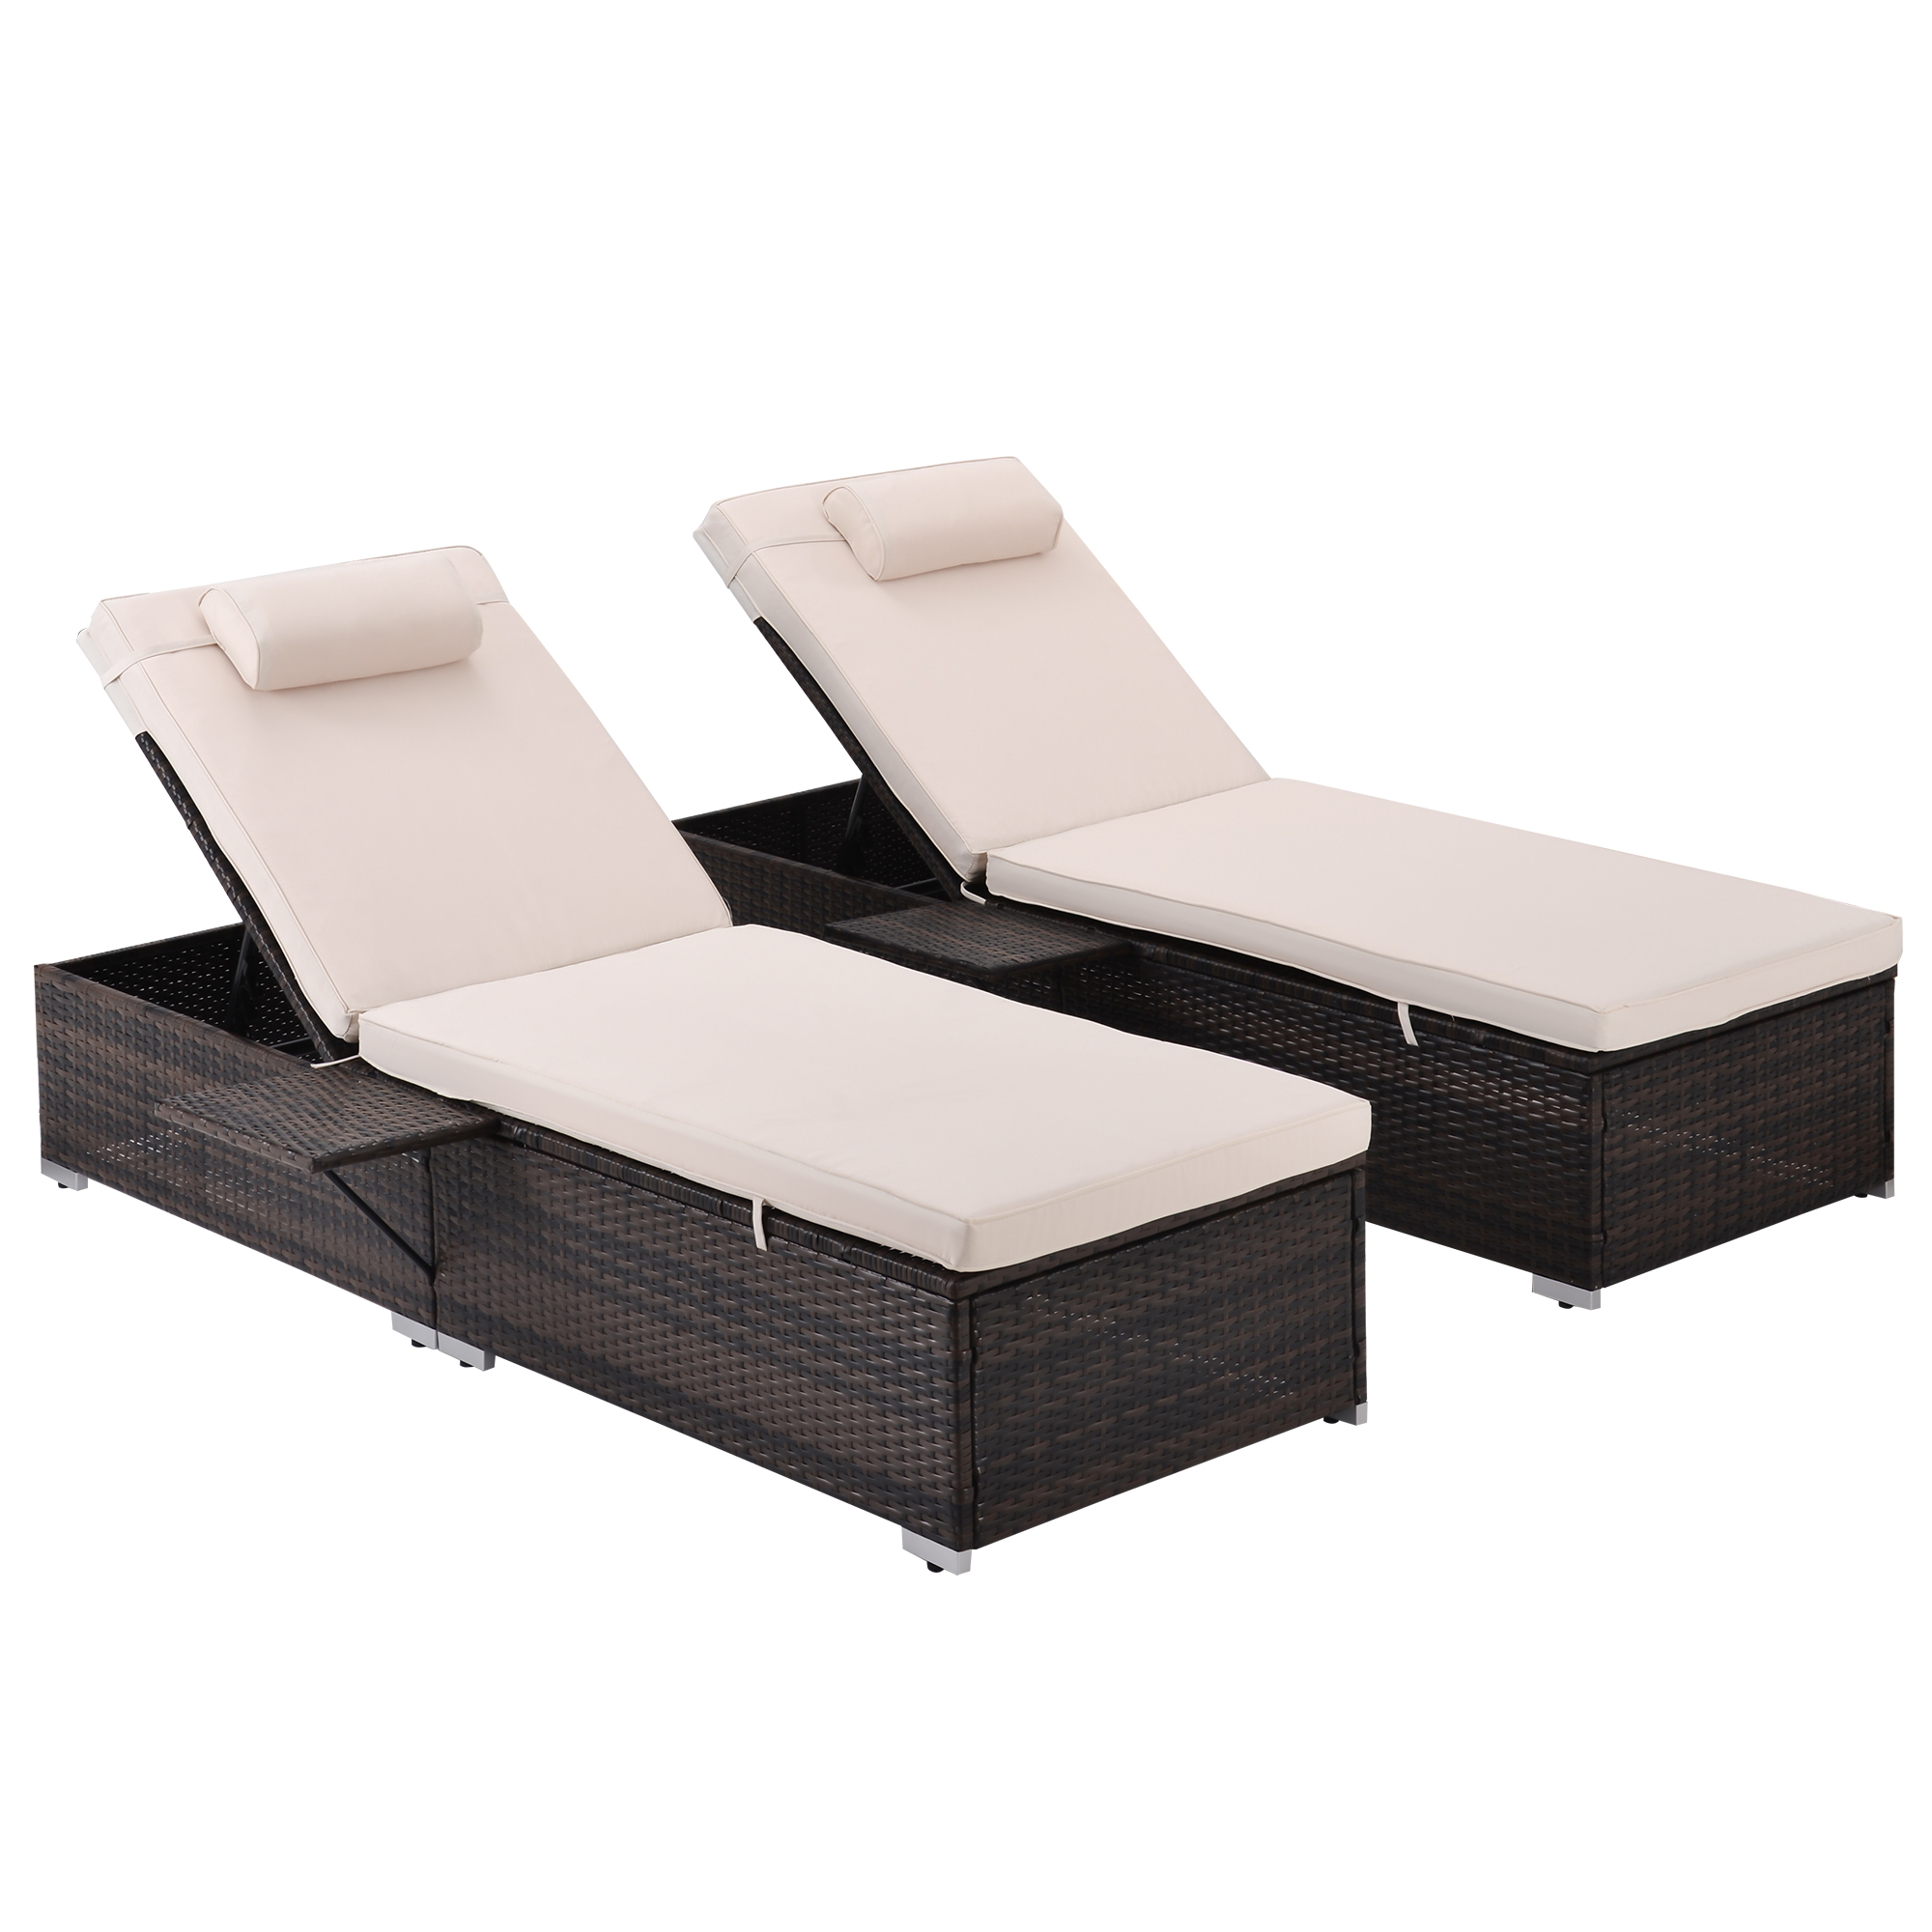 Outdoor PE Wicker Chaise Lounge, 2 Piece Patio Brown Rattan Reclining Chair Furniture Set, Beach Pool Adjustable Backrest Recliners with Side Table and Comfort Head Pillow, Brown - image 2 of 7